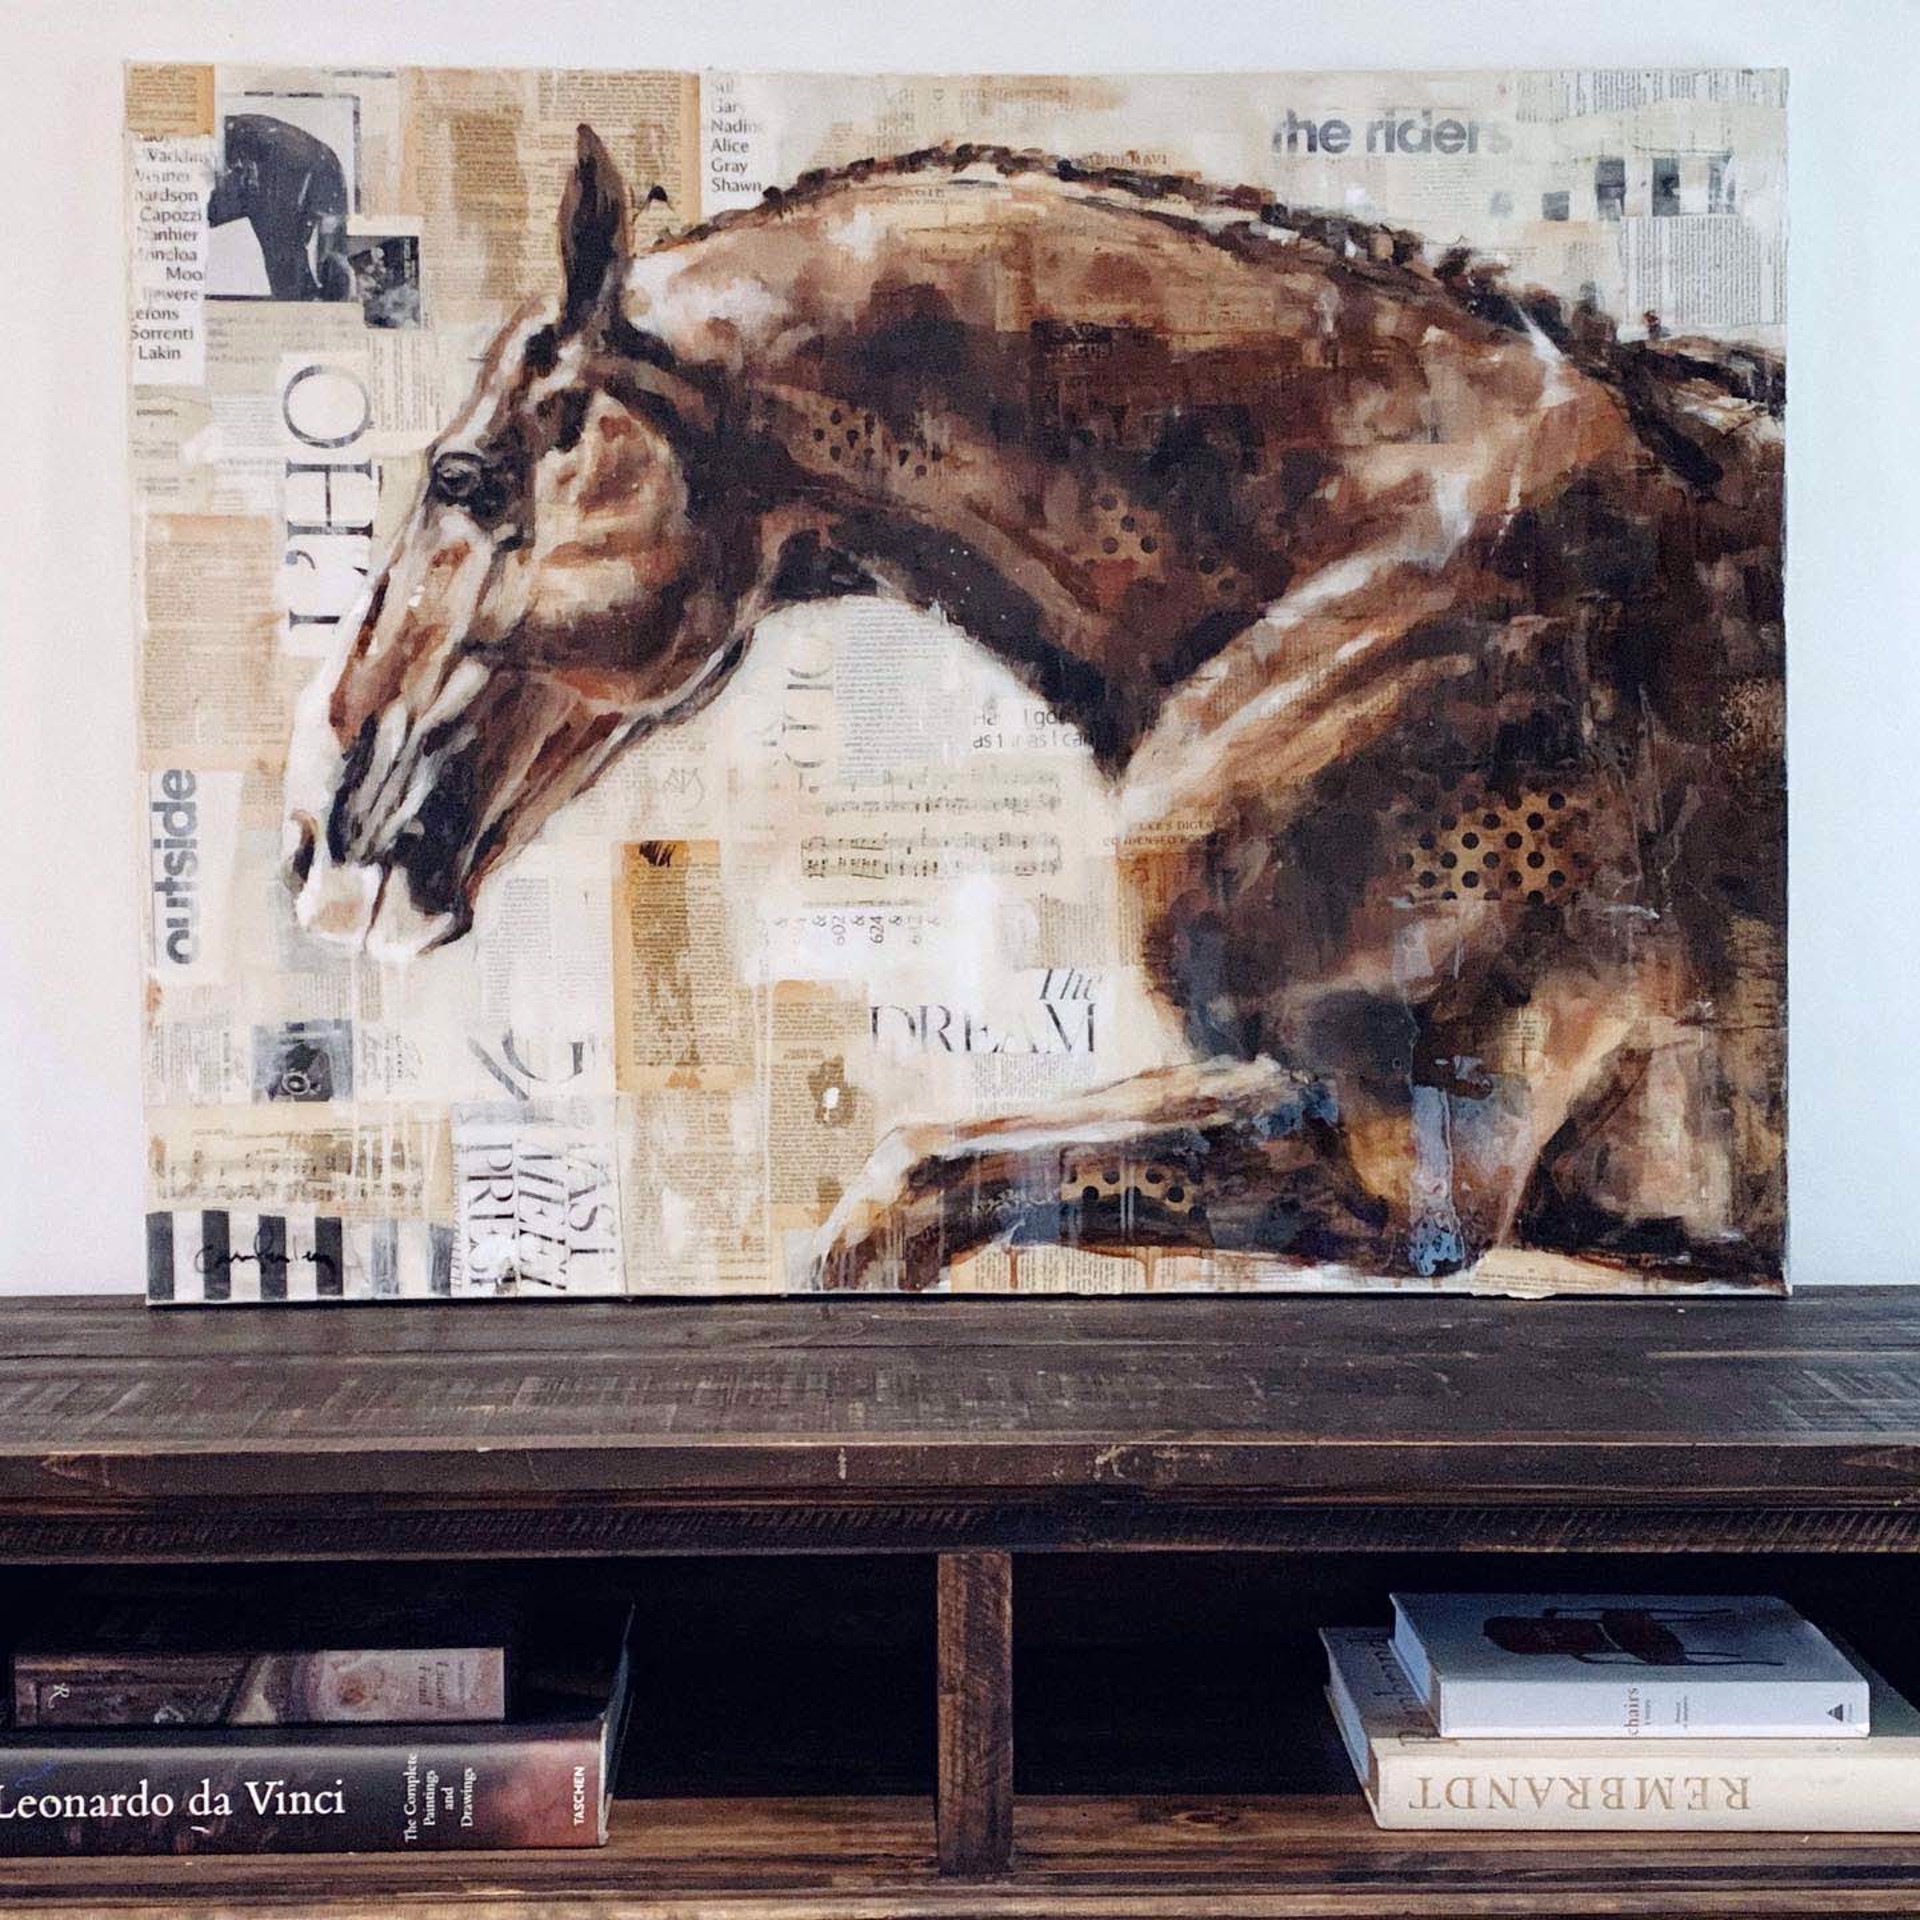 Painting Of The Front Of A Jumping Horse On A Contemporary Newspaper Collage Background, By Carrie Penley